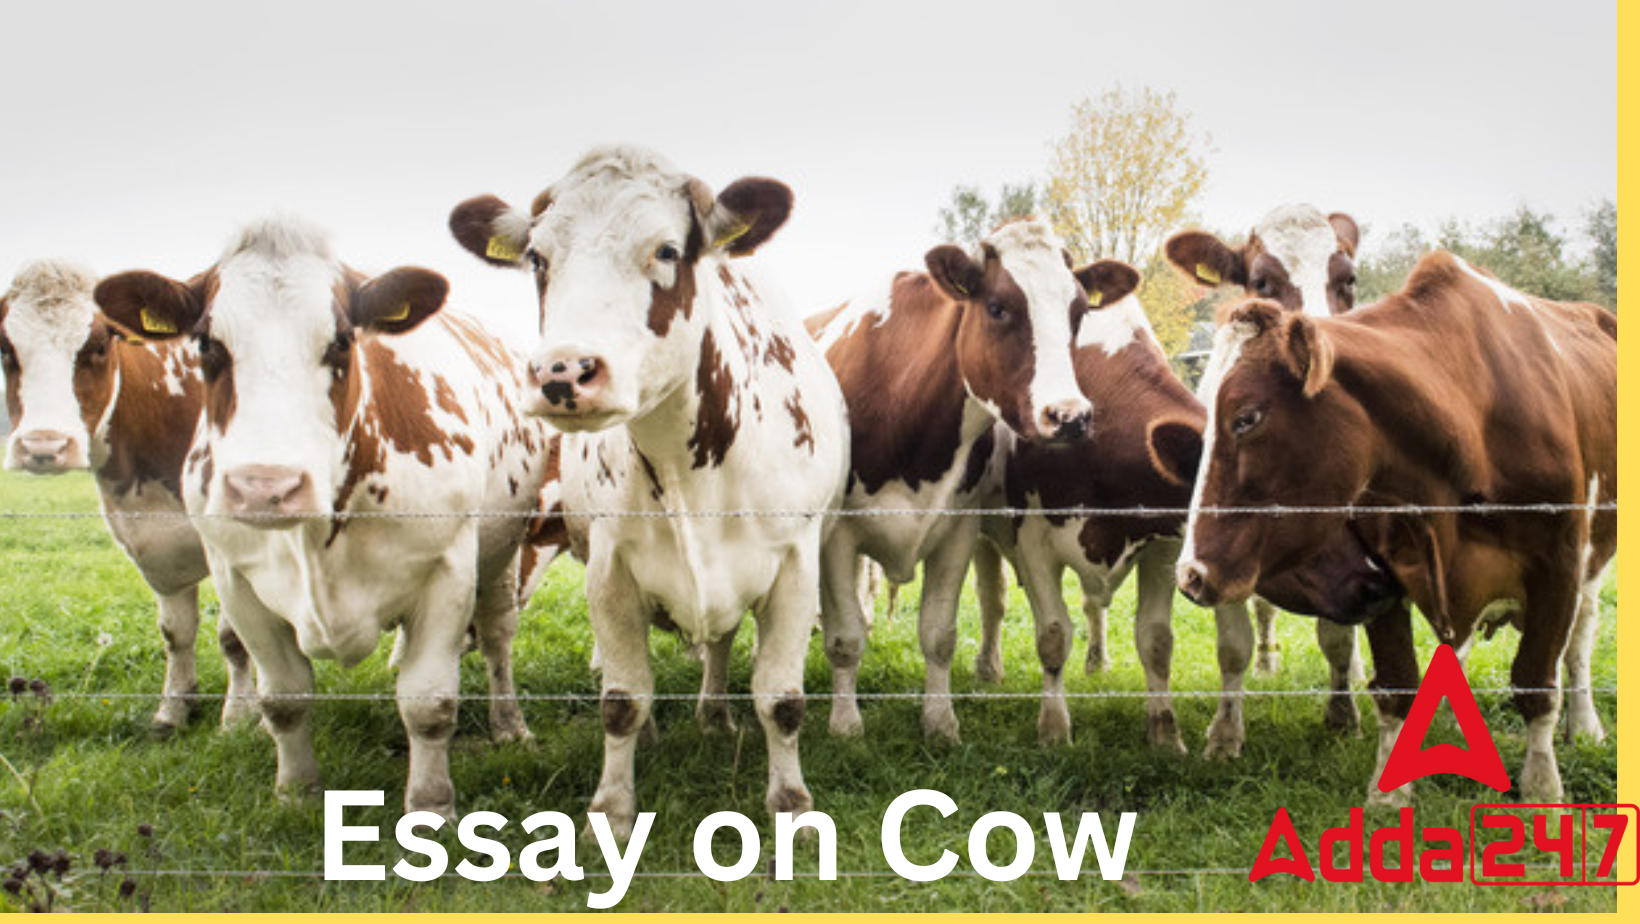 The Cow Essay 10 Lines in English and Hindi for Class 1_30.1